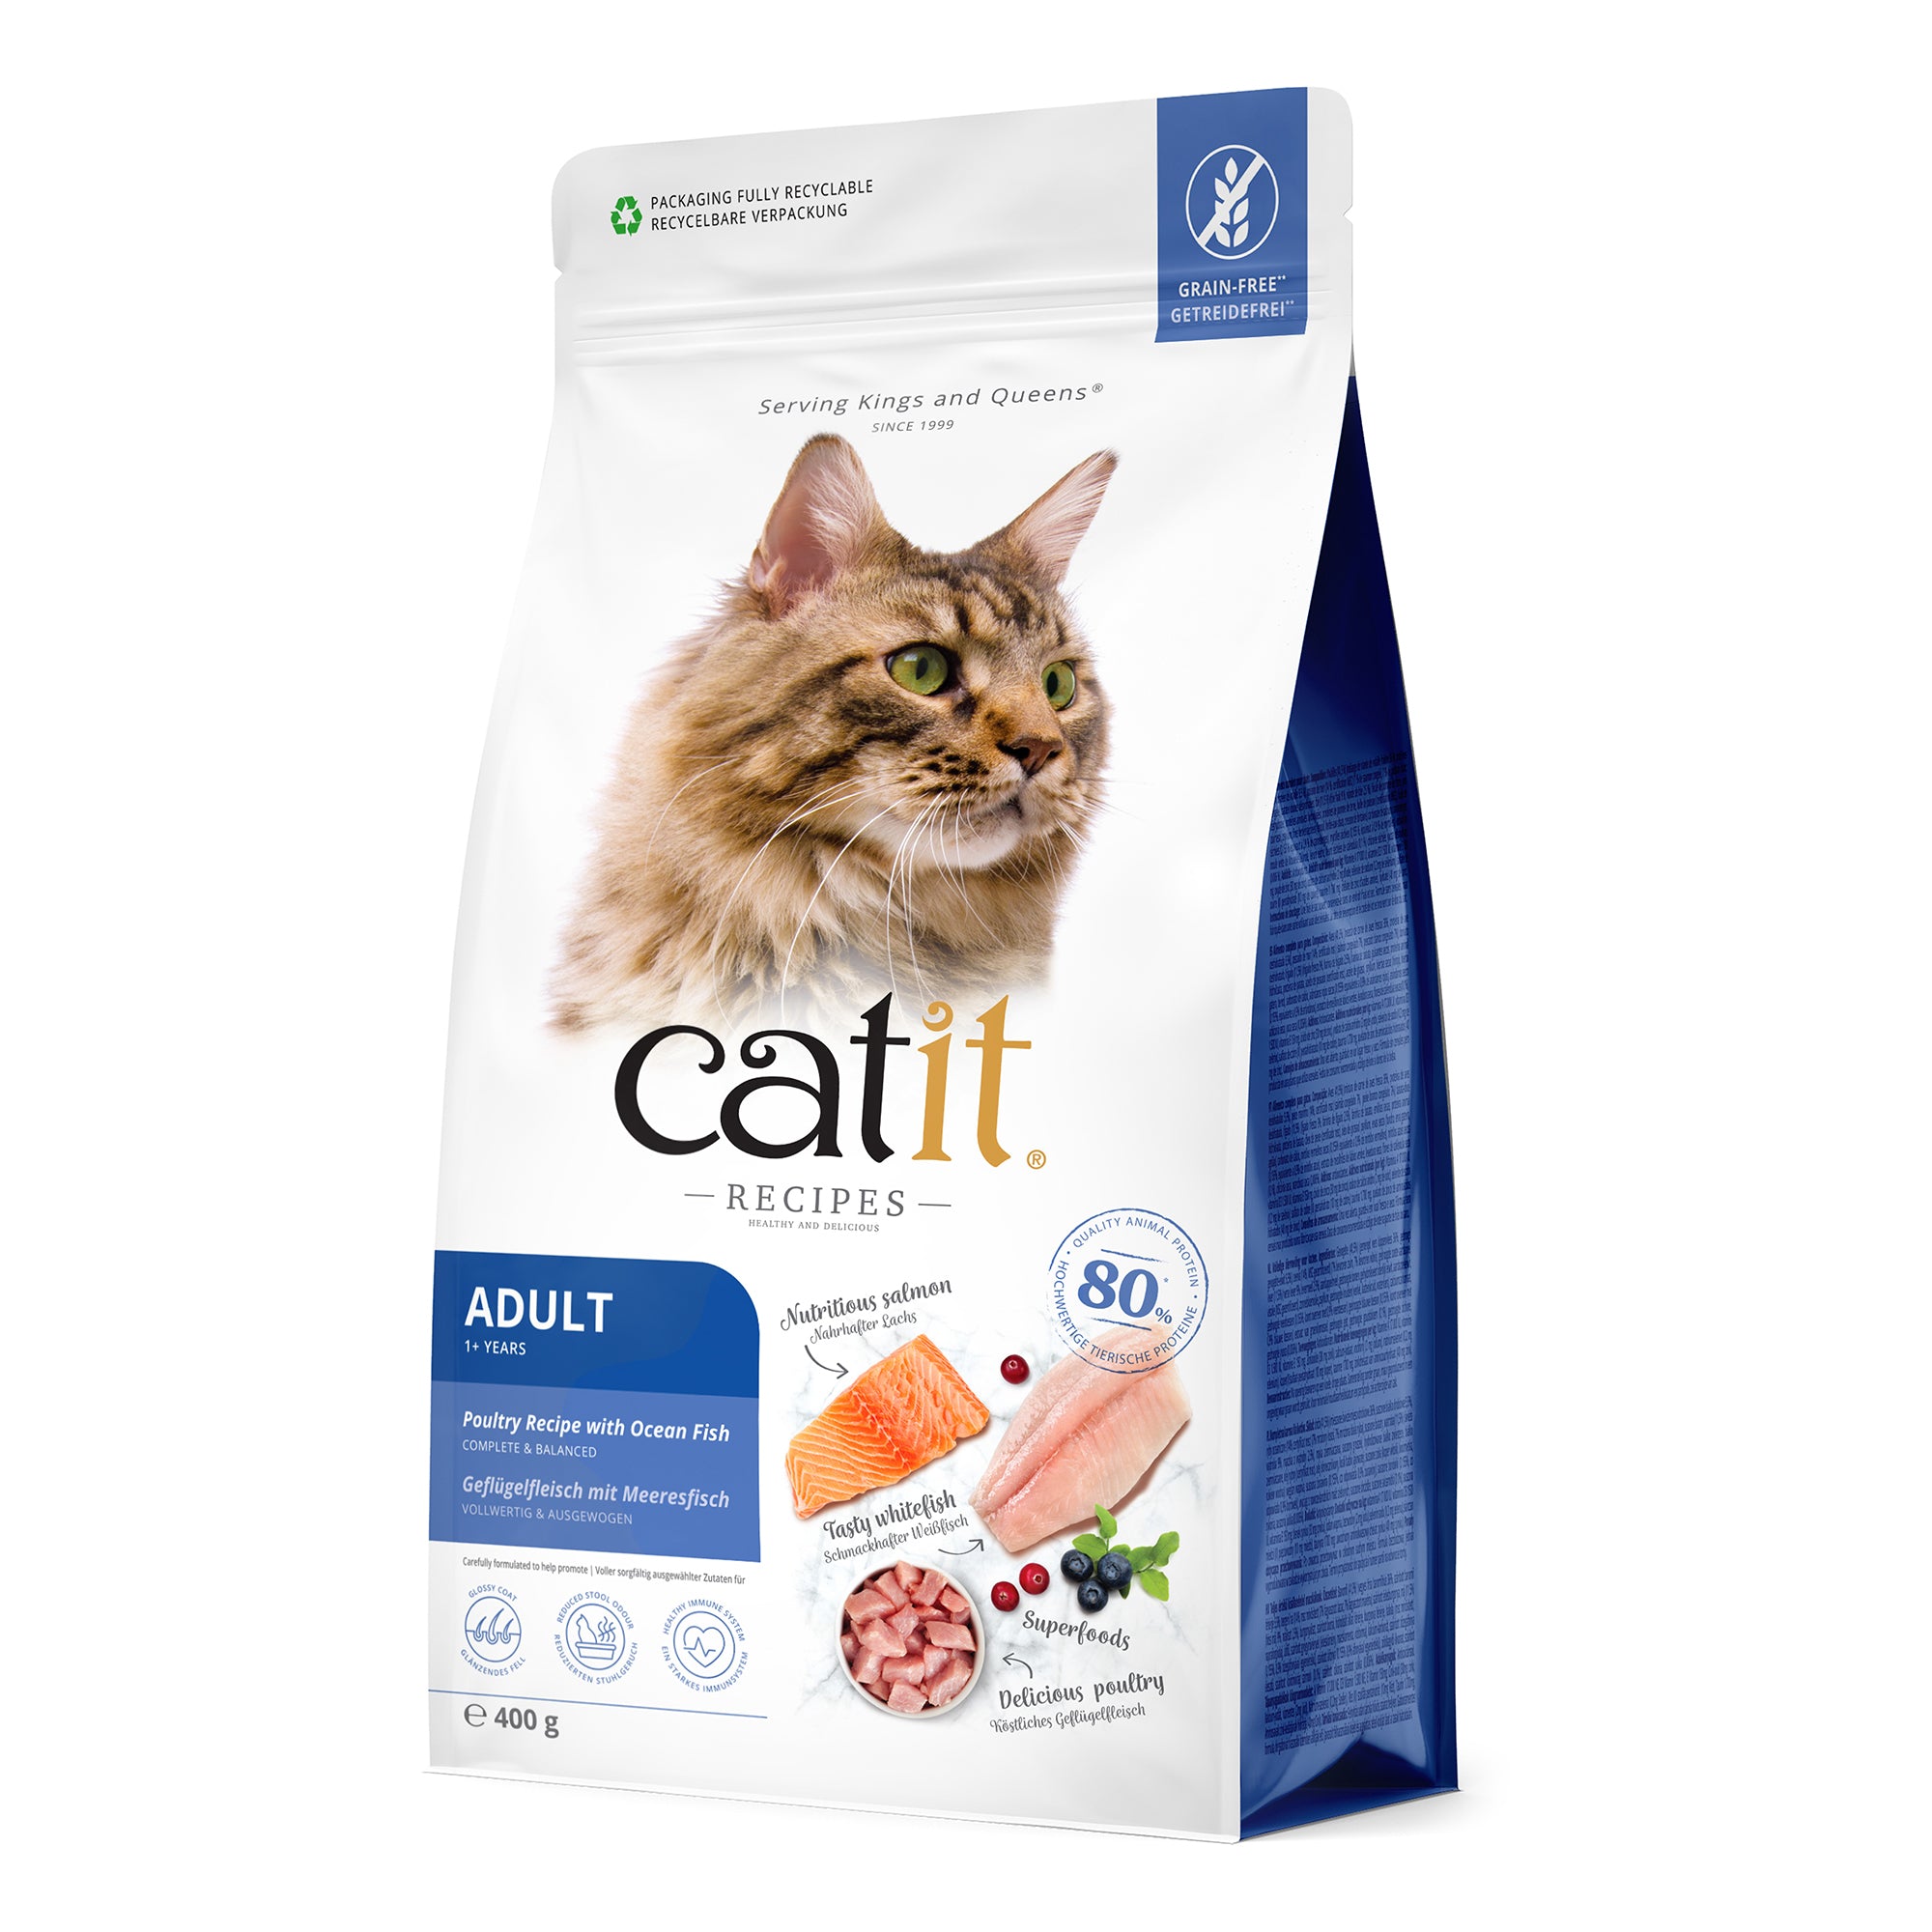 Catit Recipes Adult Poultry with Ocean Fish Dry Cat Food 400g/2kg